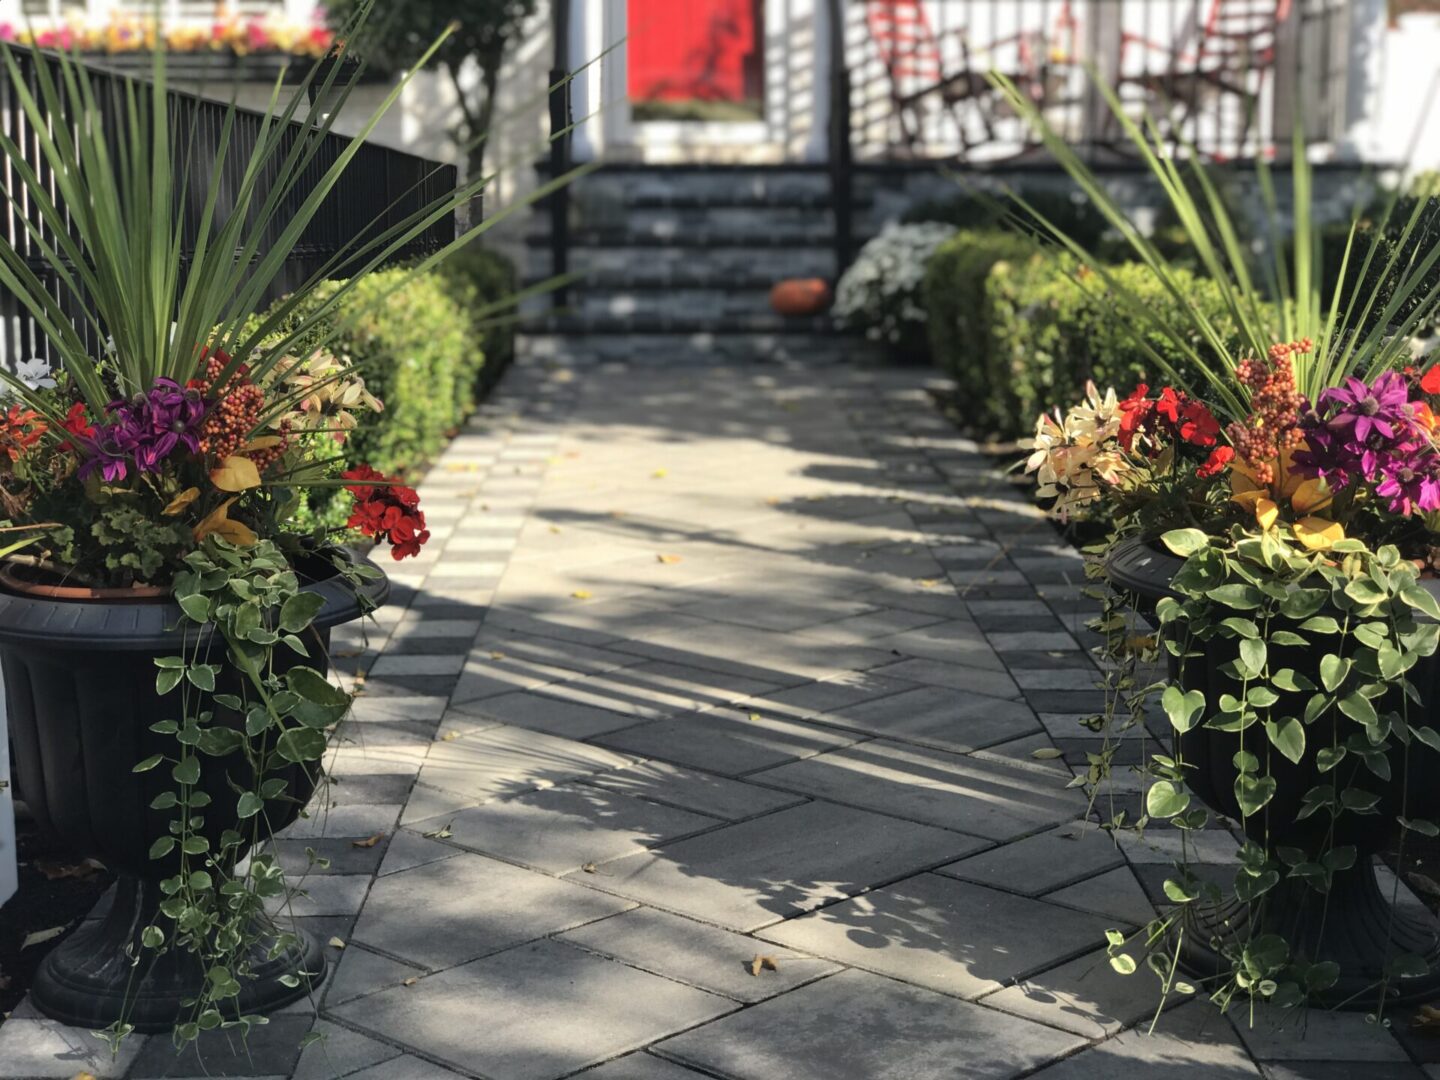 An entrance of a house with beautiful flowers